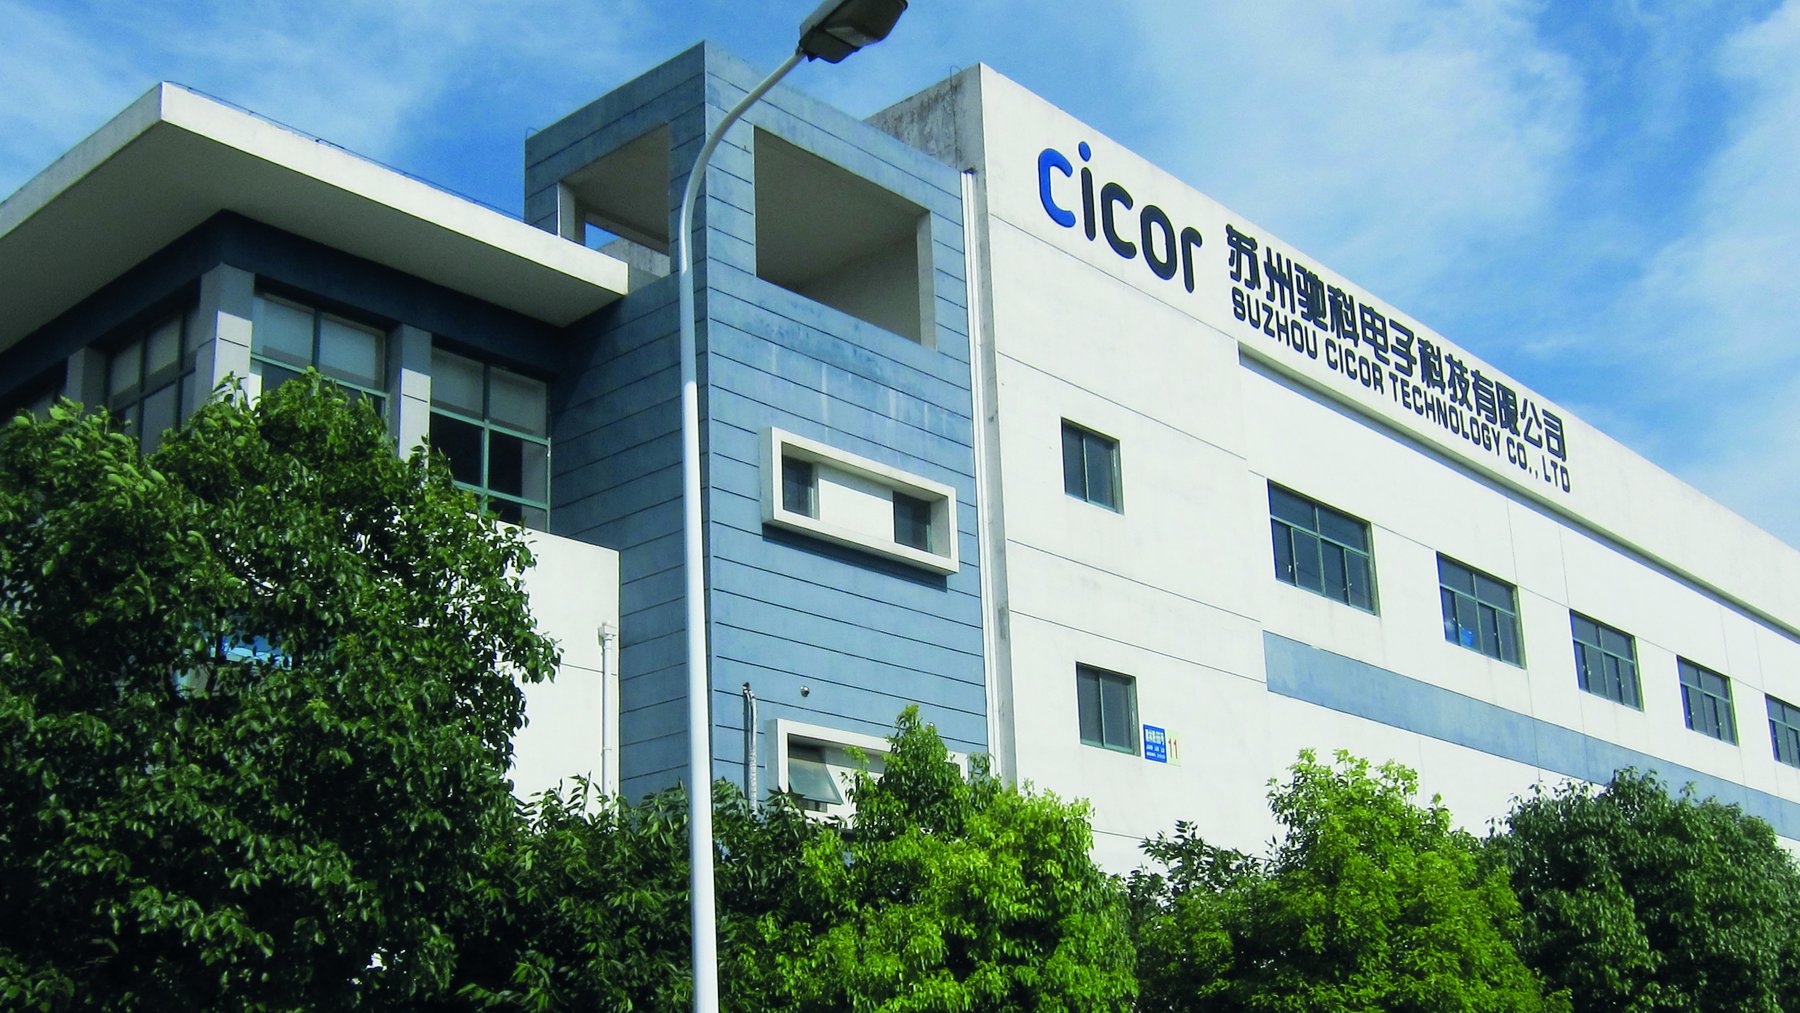 Cicor production site in Suzhou, China